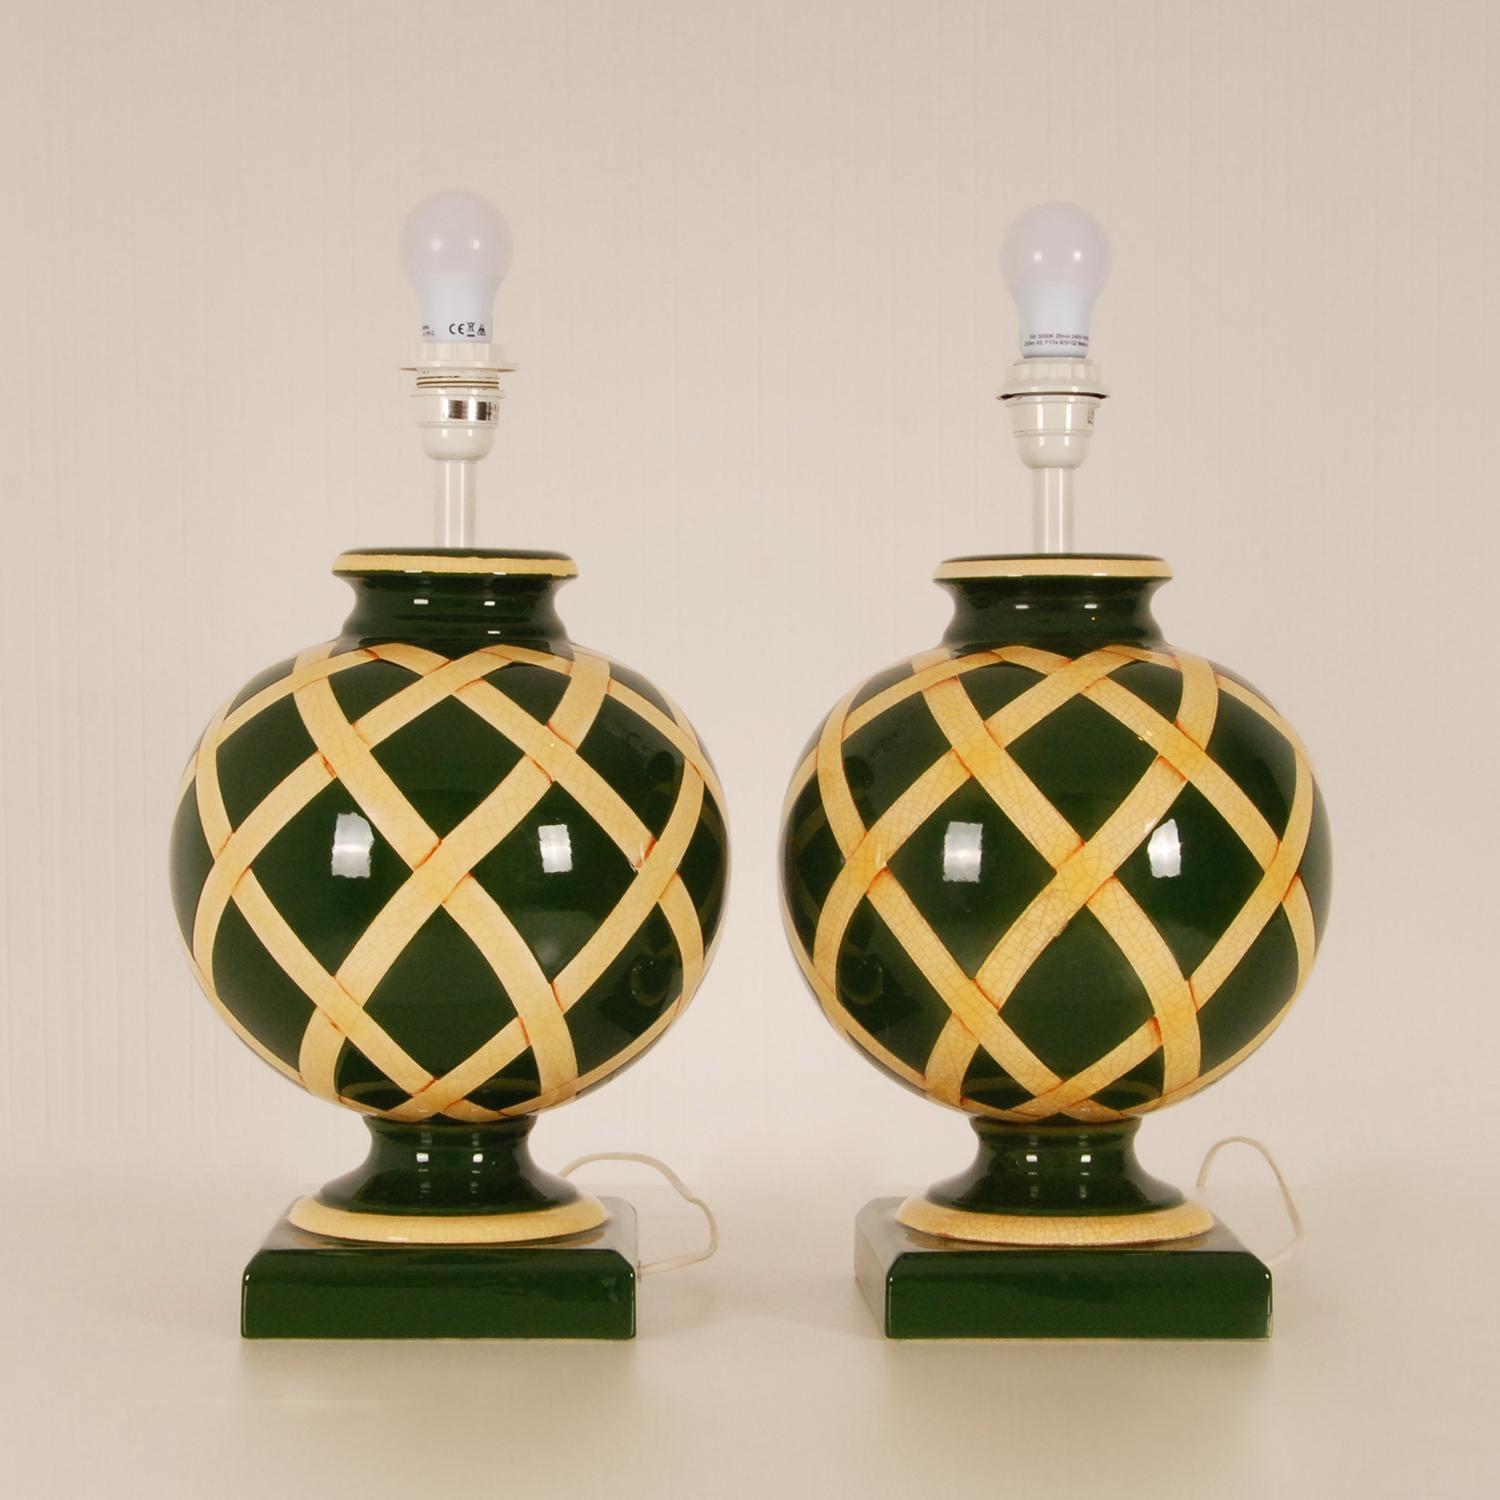 Vintage French Ceramic Vase Table Lamps Green Beige Argyle Pattern, a Pair For Sale 1